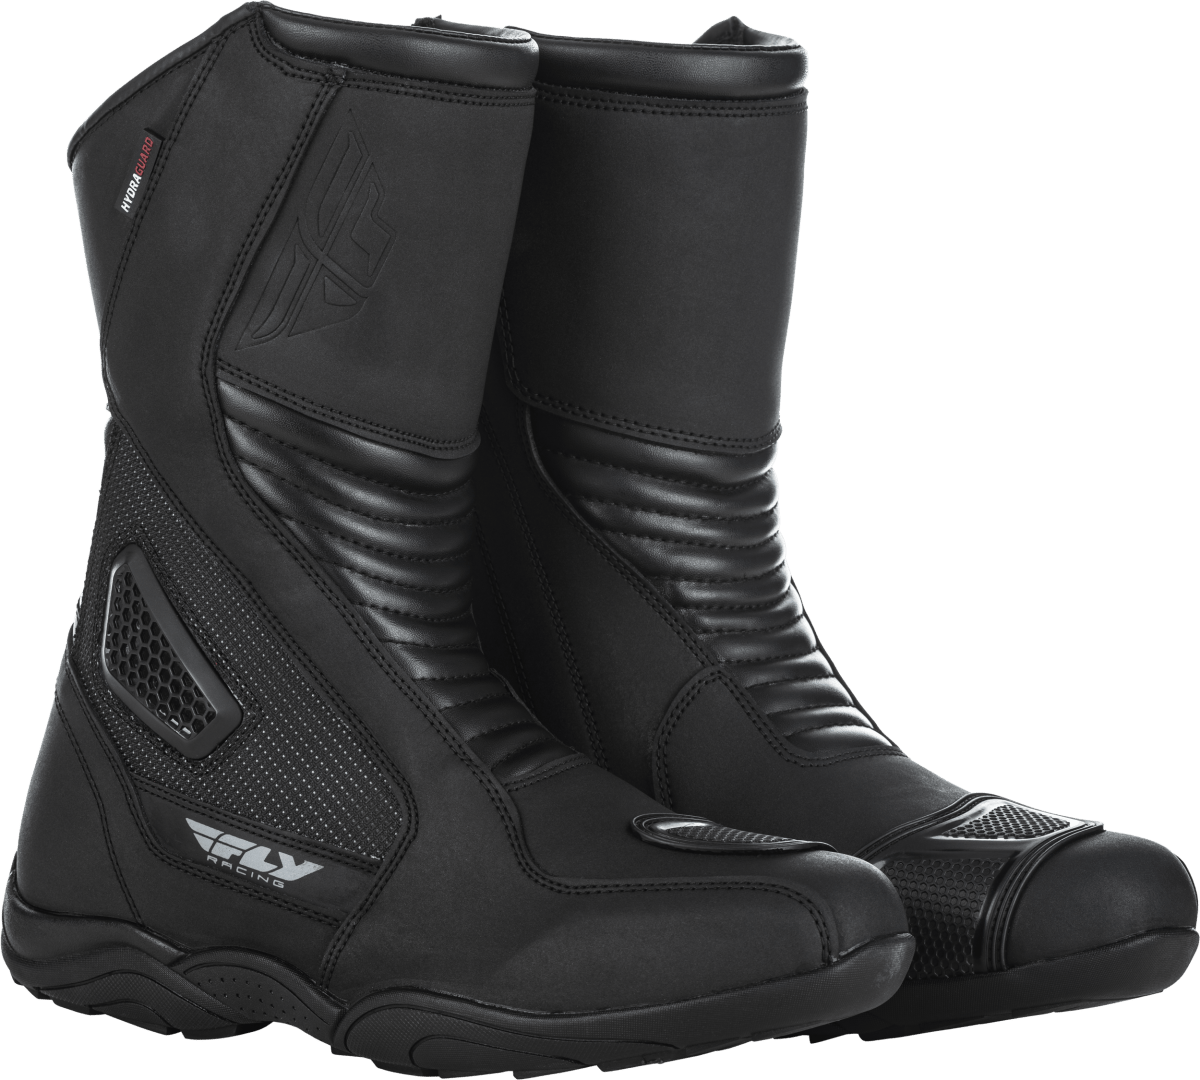 FLY RACING - MILEPOST BOOTS - 361-98007 - 191361298233